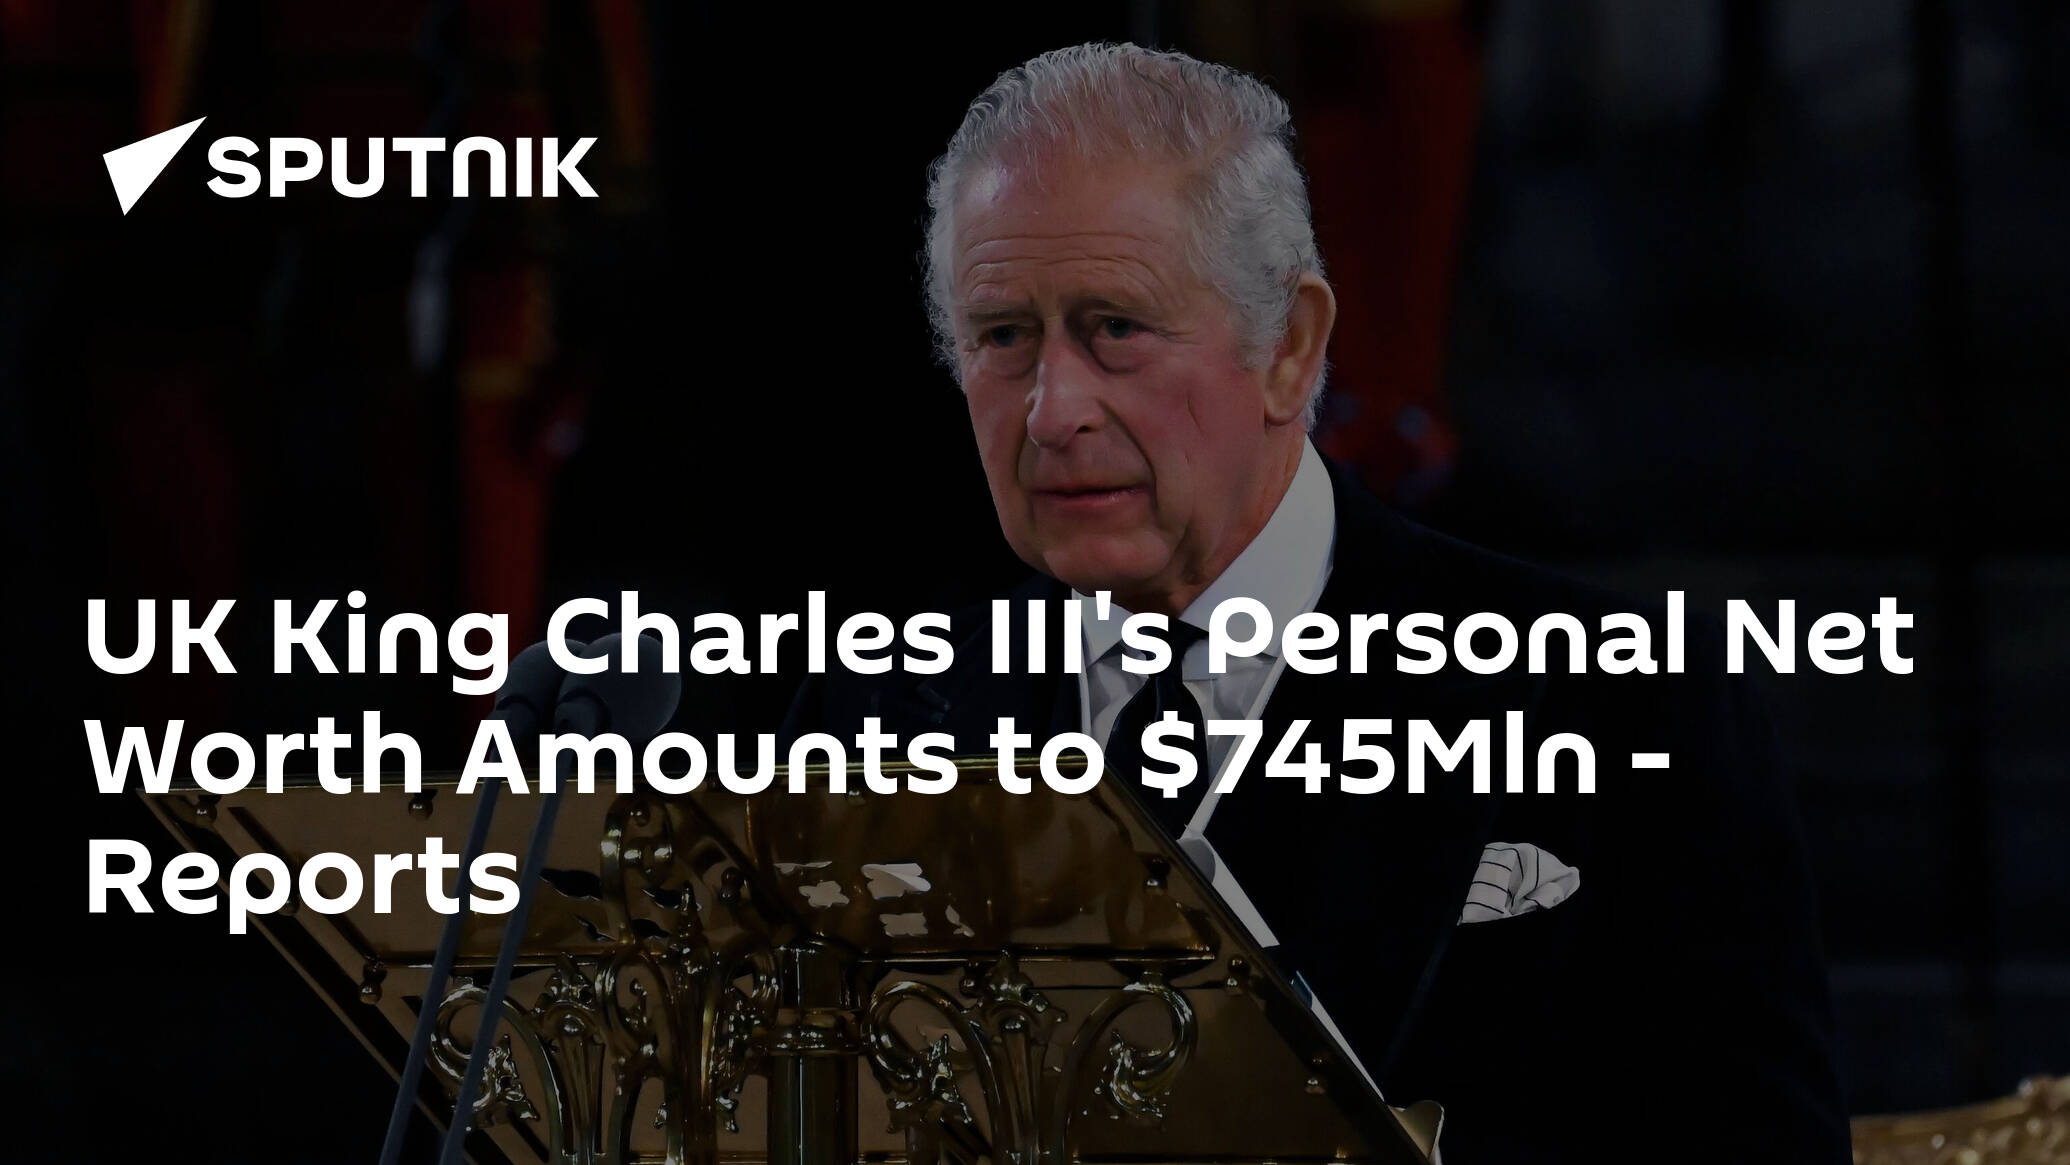 UK King Charles III's Personal Net Worth Amounts to 5Mln – Reports